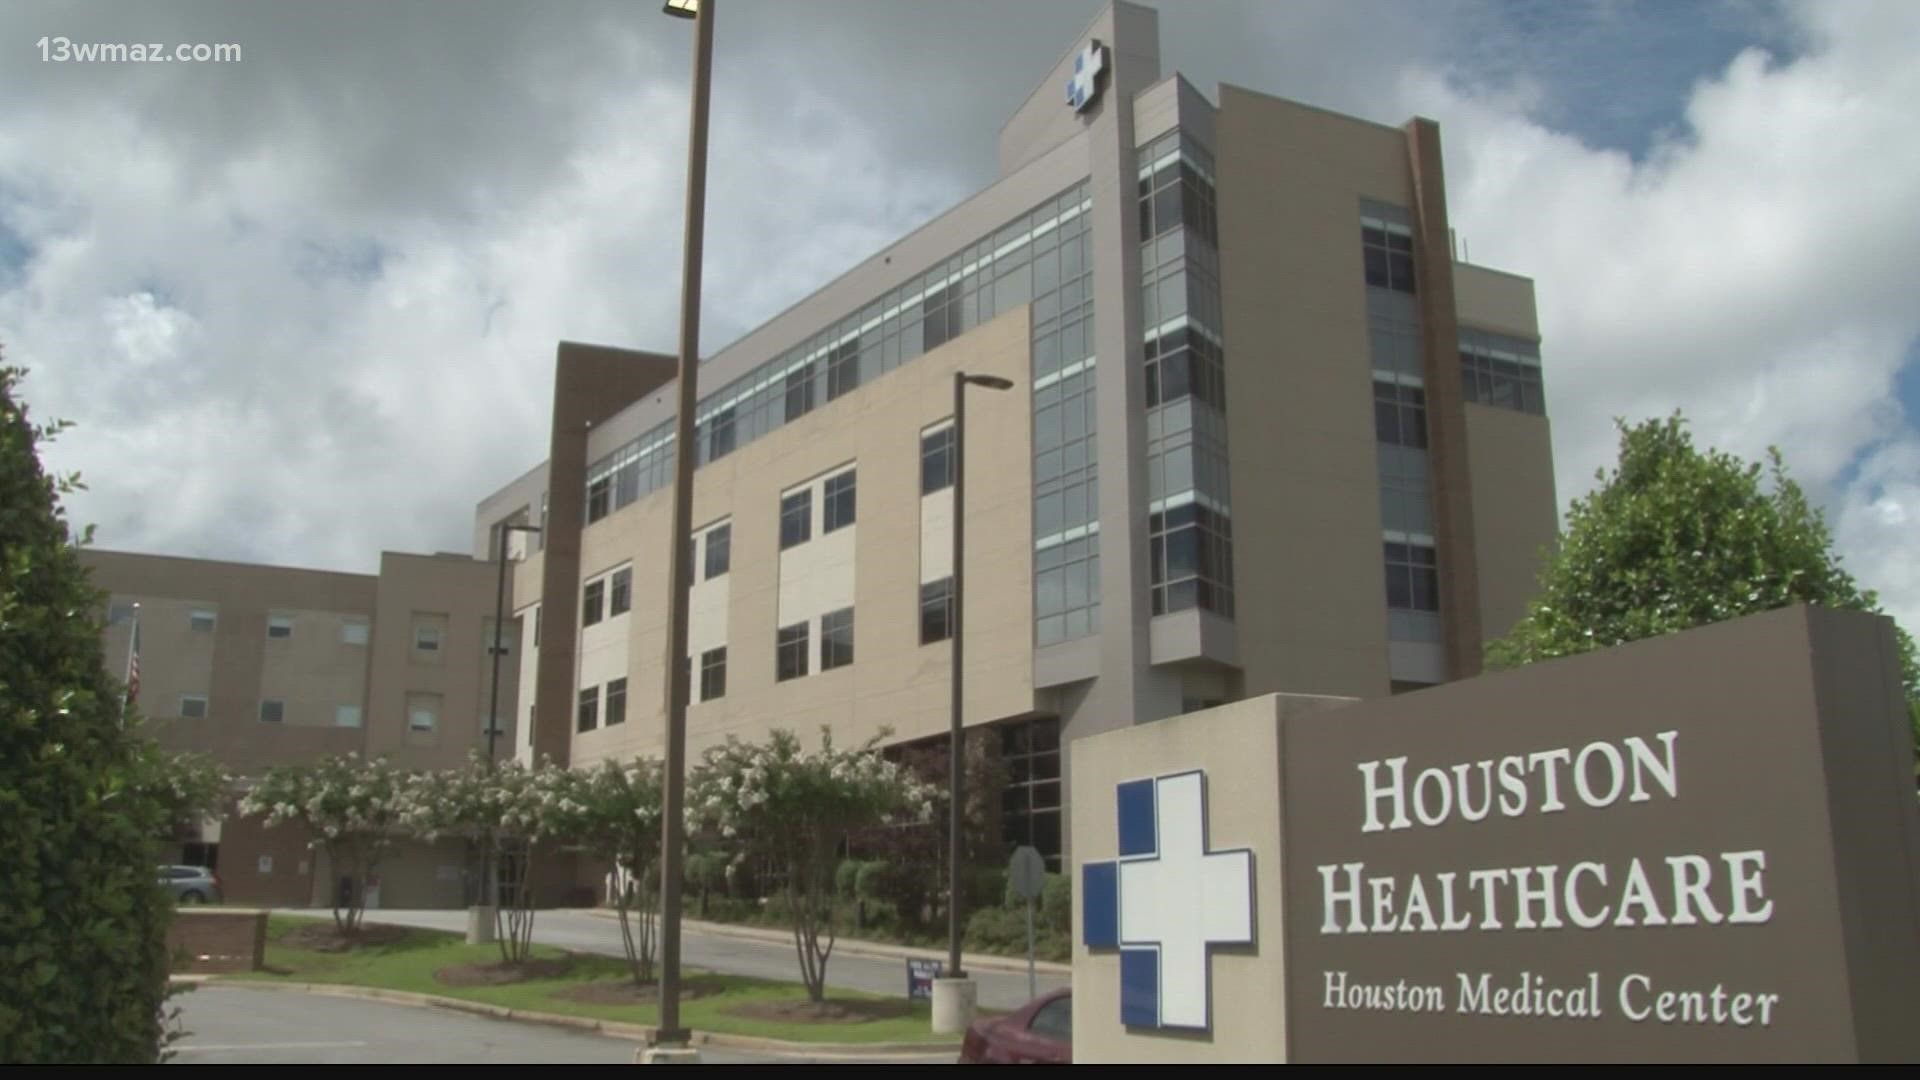 In August, Houston Healthcare had more than 100 COVID-19 patients. As of Oct. 12, there are less than 20